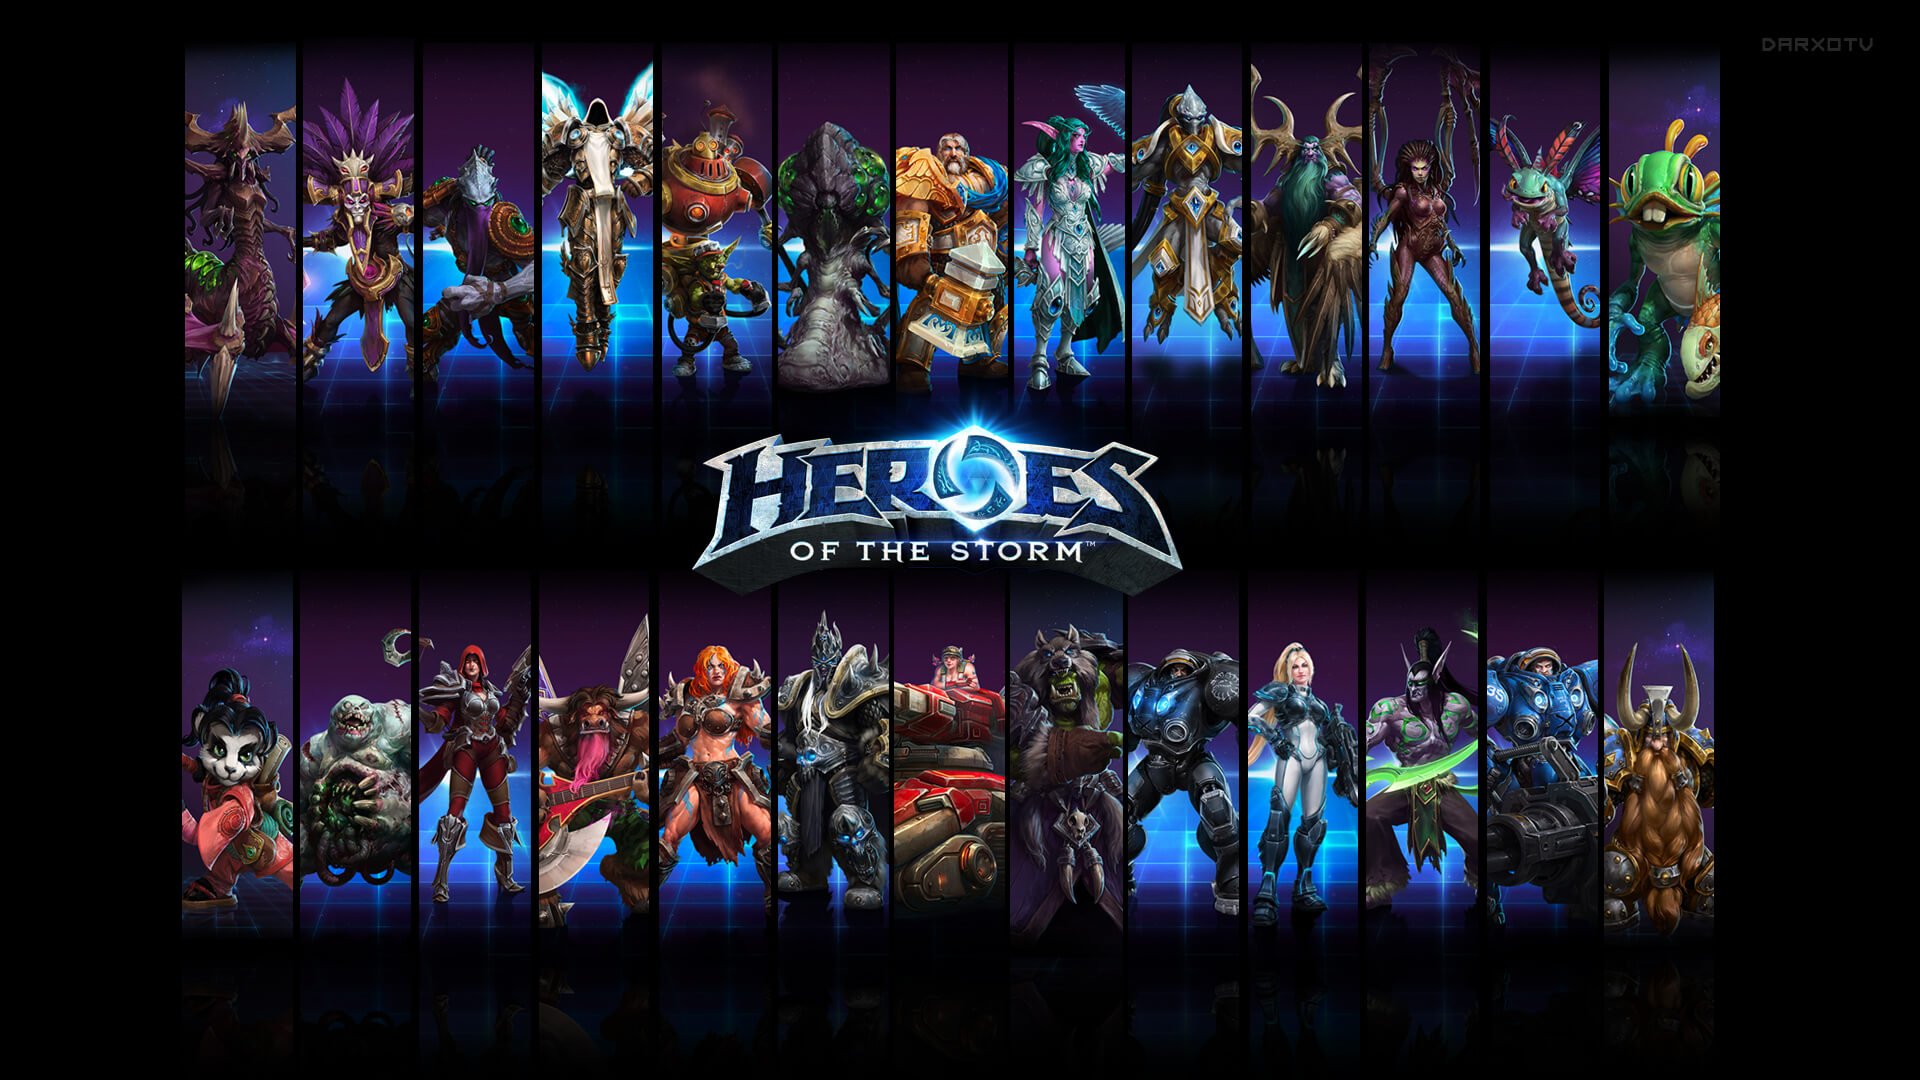 Início - Heroes of the Storm